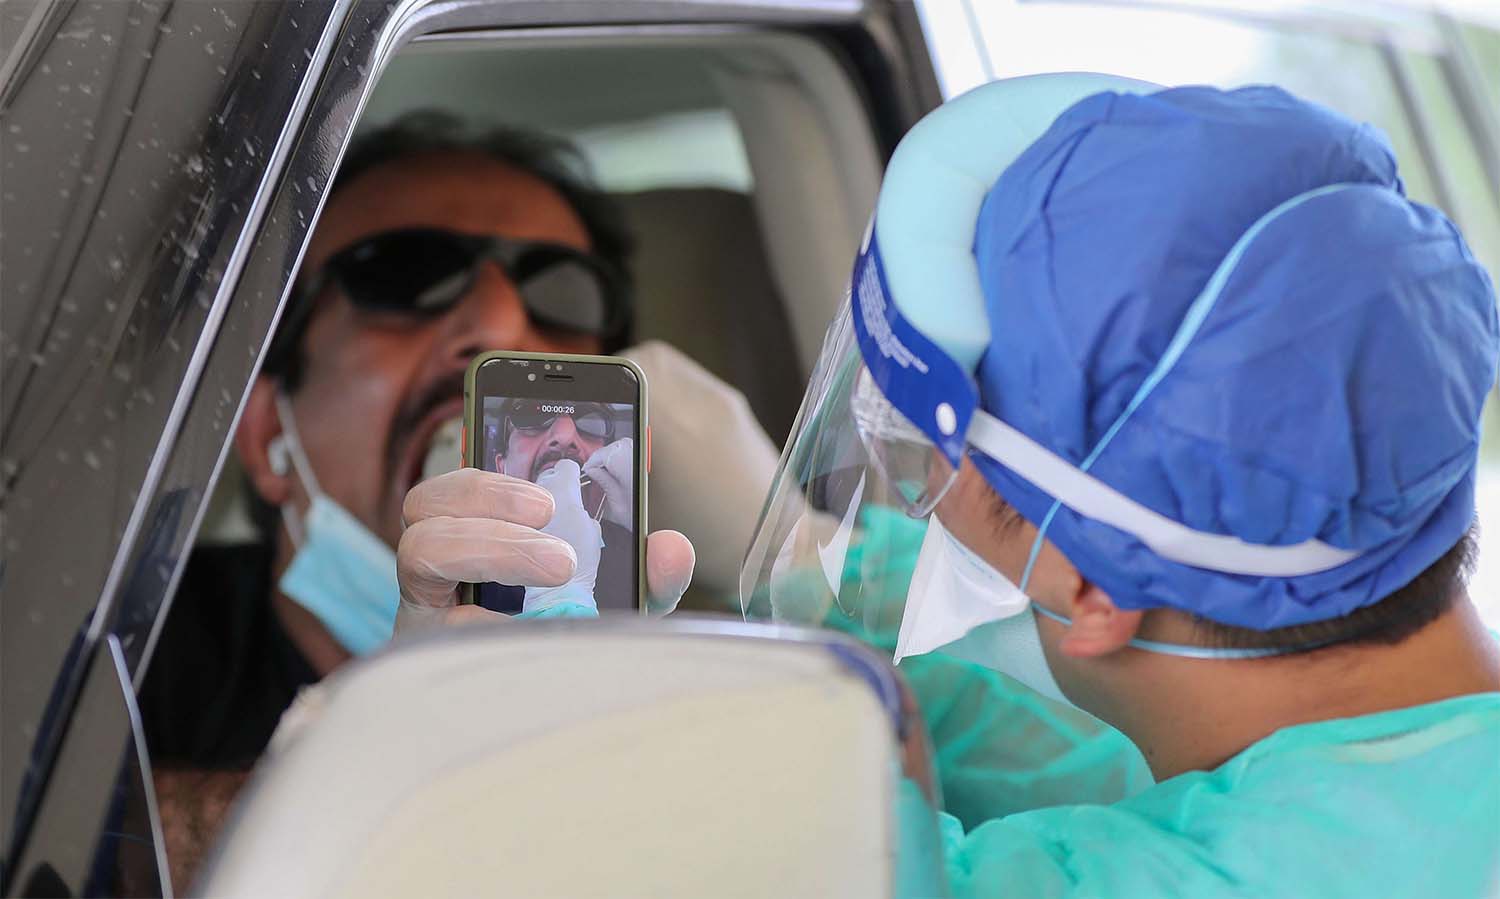 A health worker collects a swab sample from a man at a drive-thru testing service for COVID-19 coronavirus in Doha